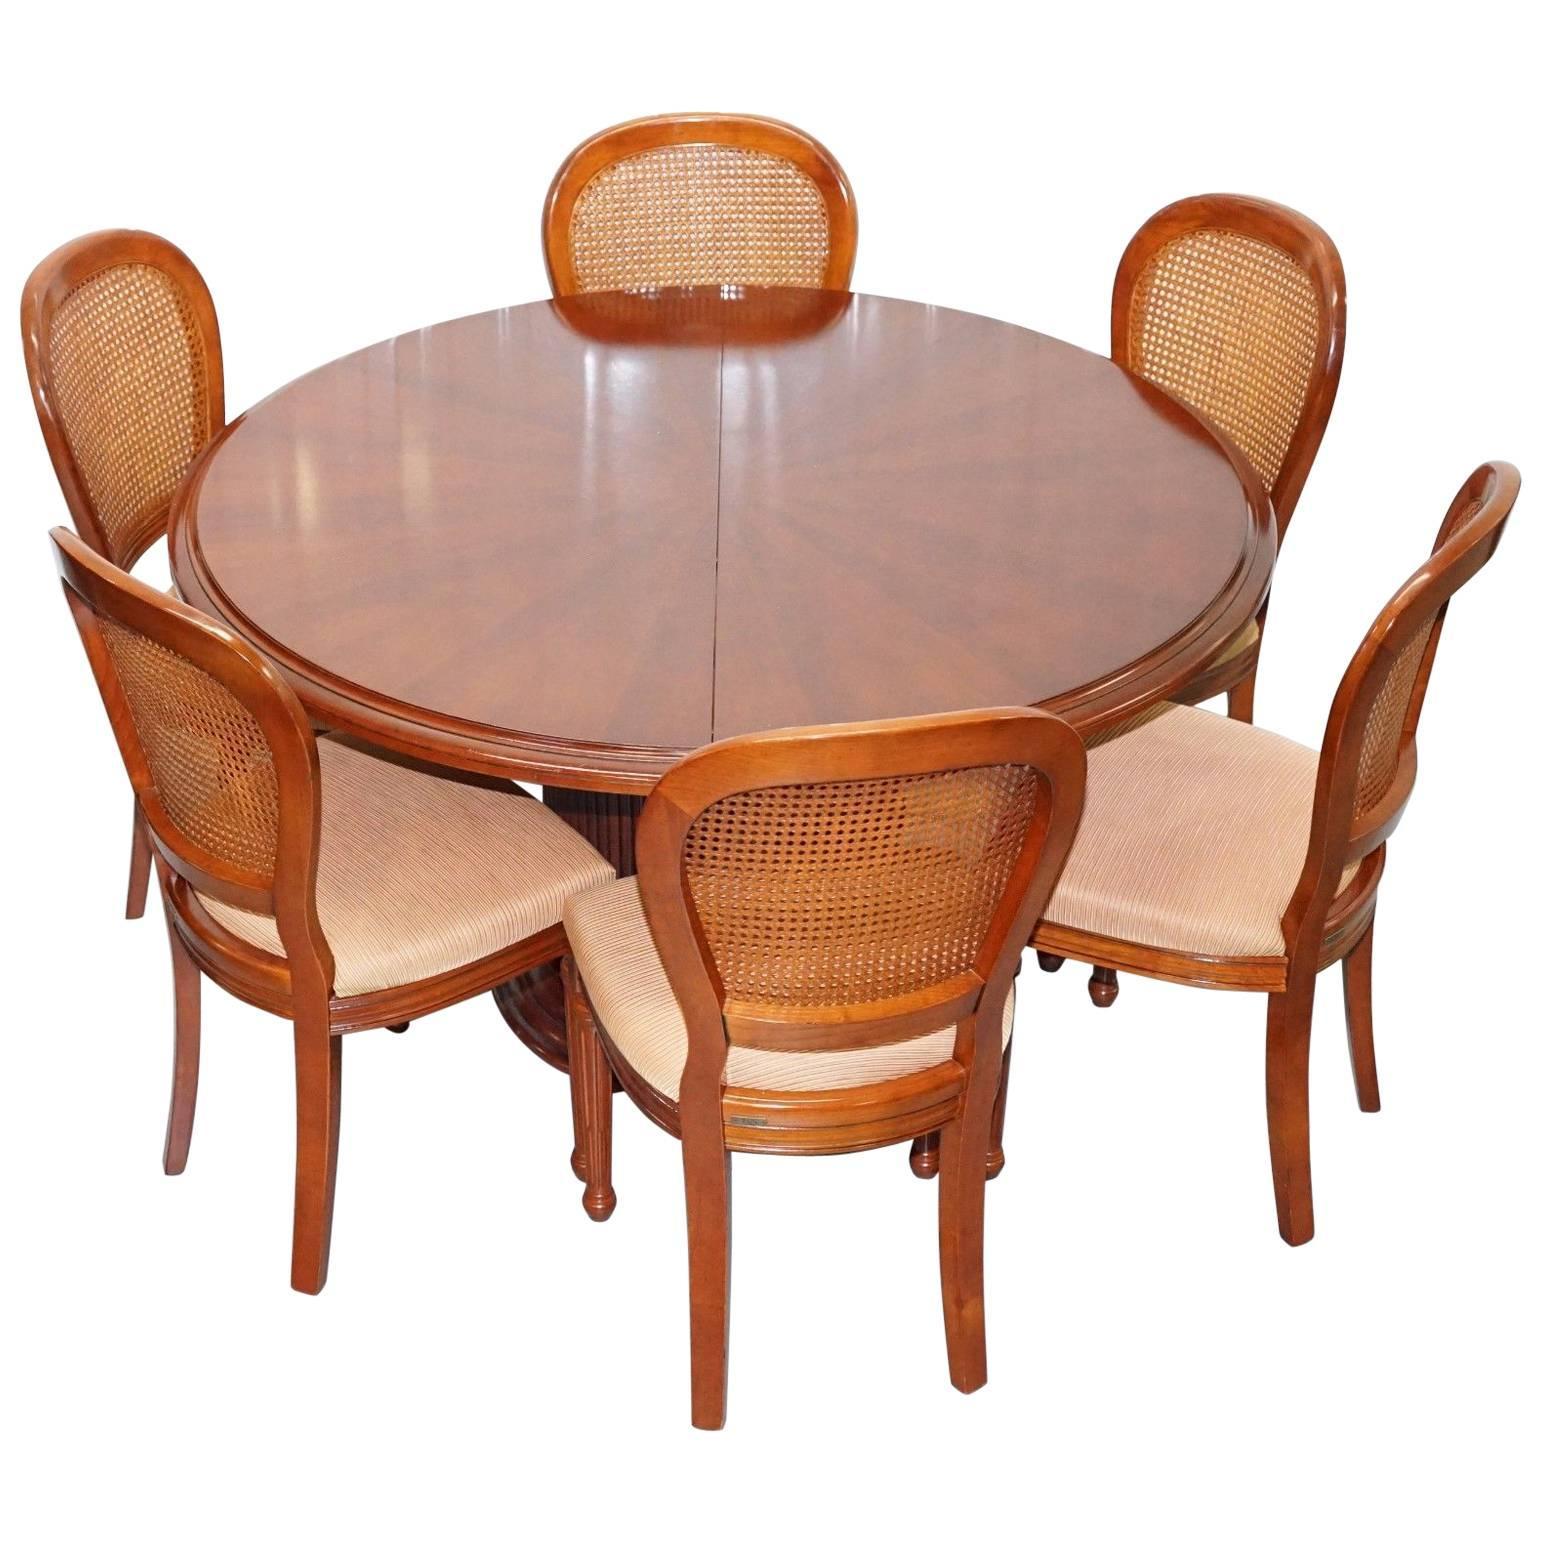 Grange Handmade France Cherrywood Extending Dining Table and Six Chairs